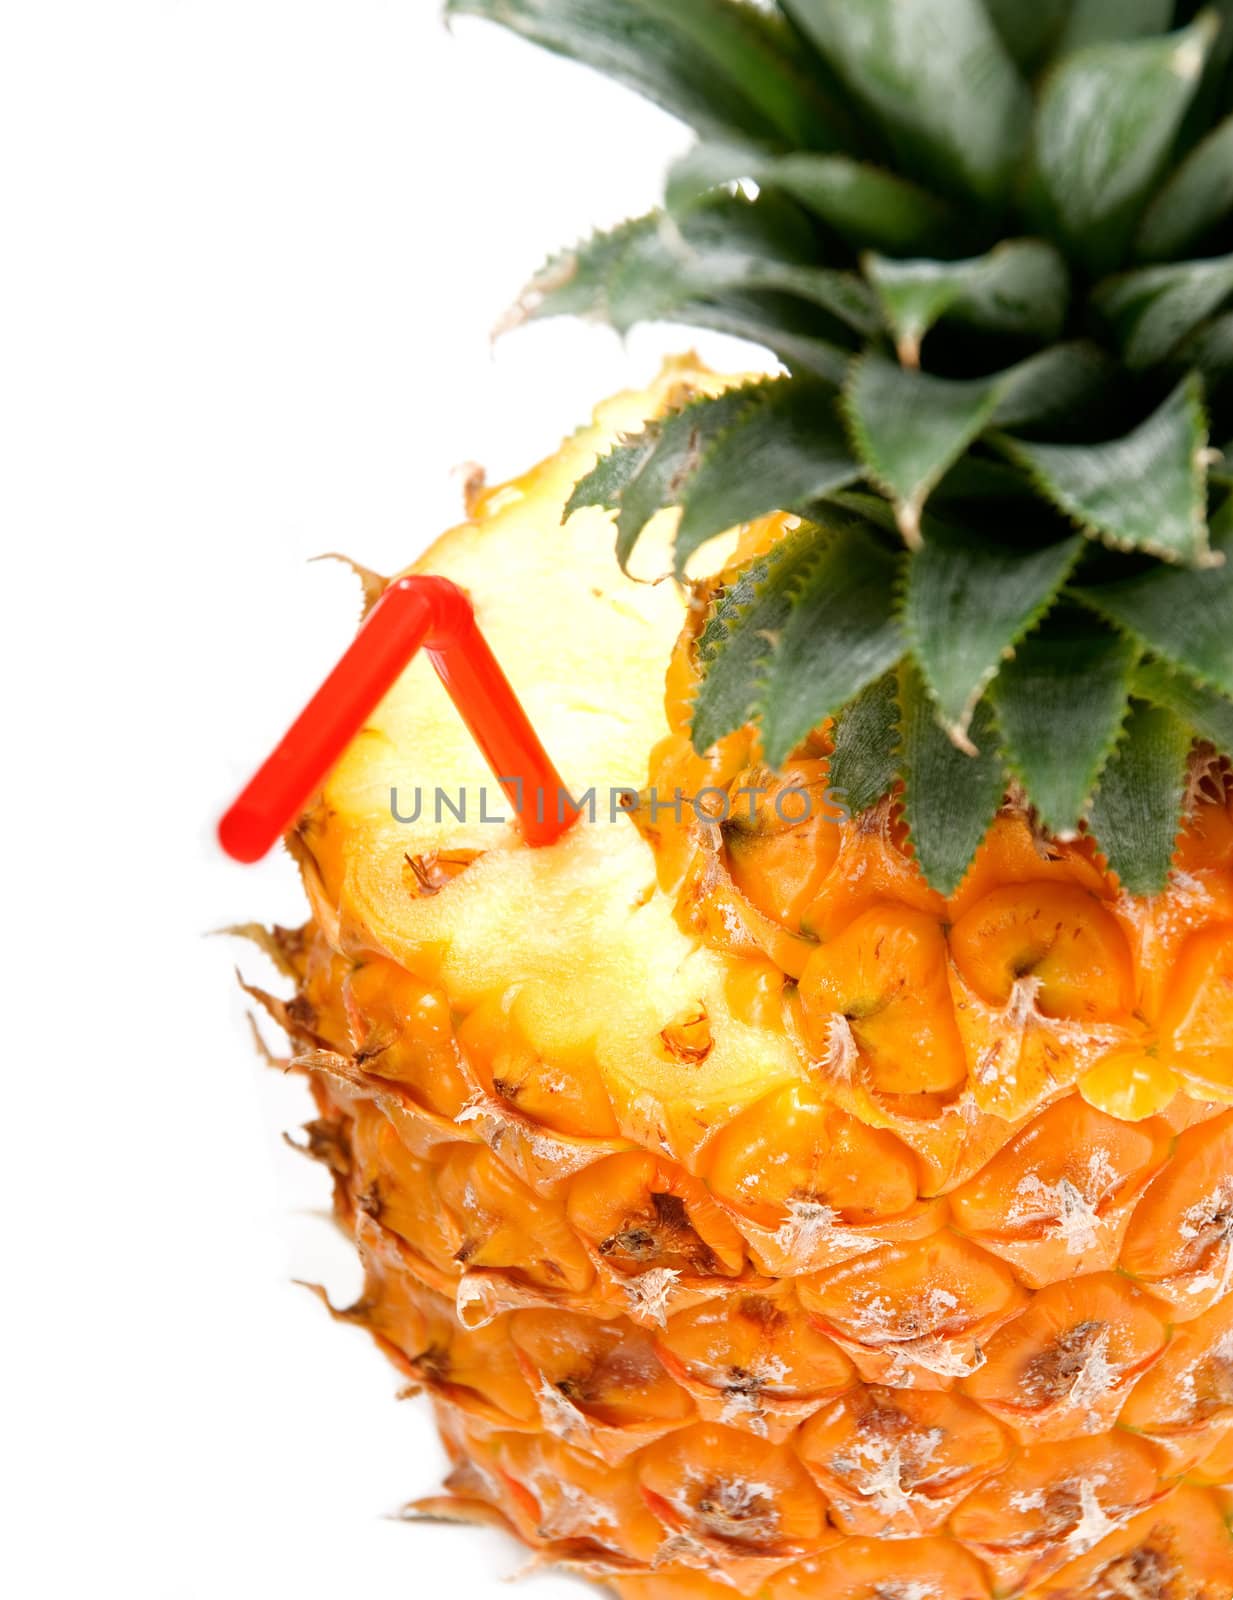 ripe vivid pineapple with red straw over white background